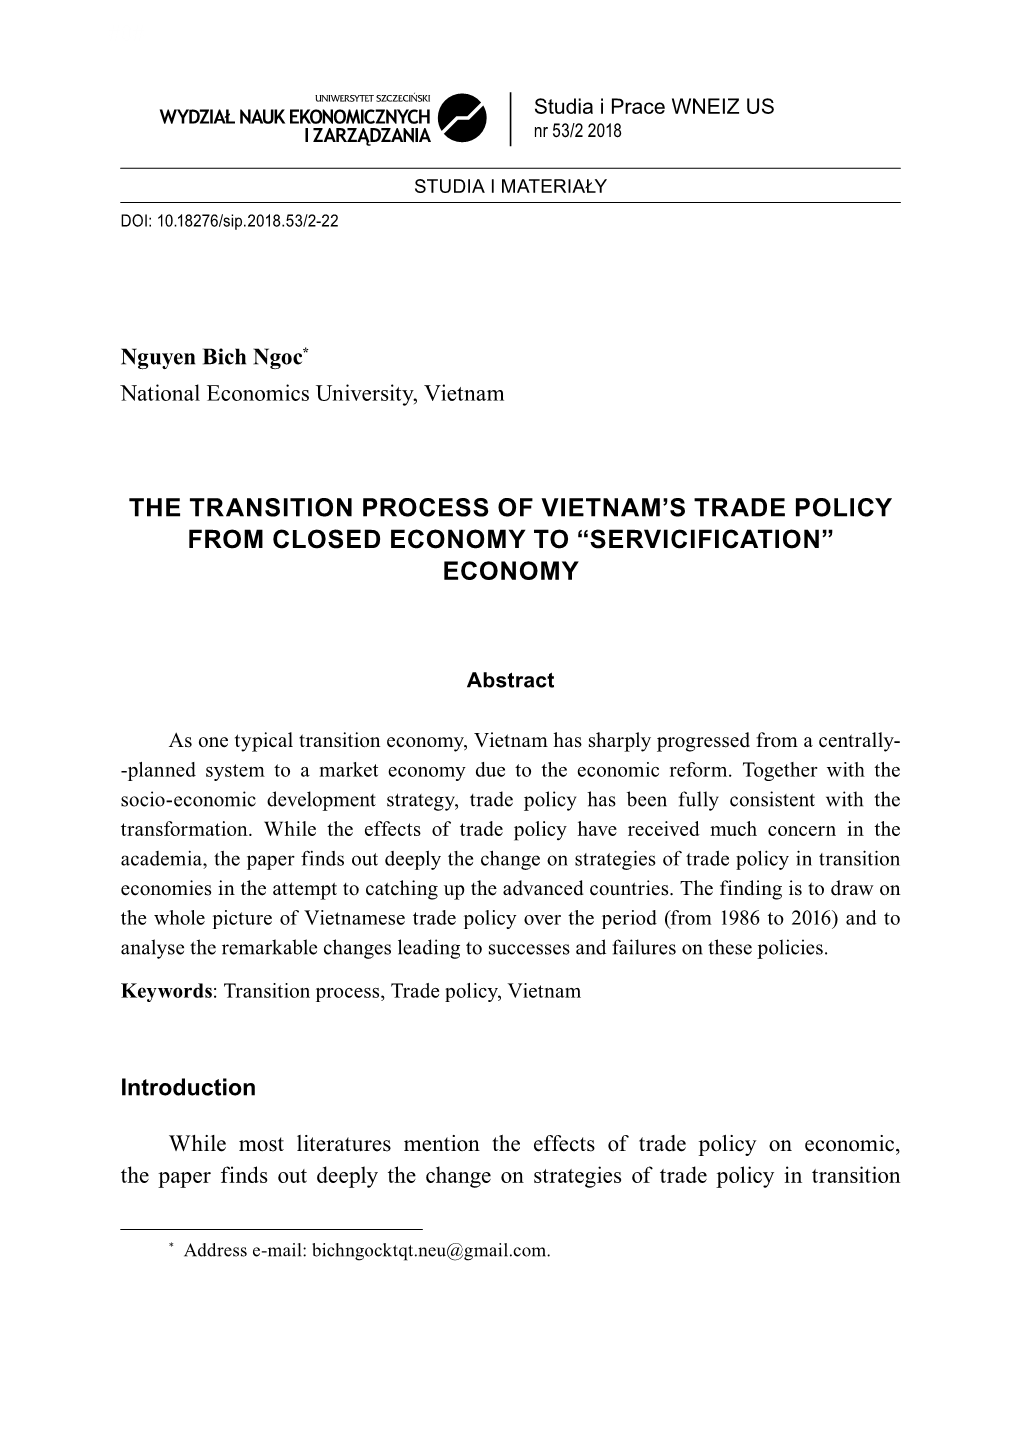 The Transition Process of Vietnam's Trade Policy From